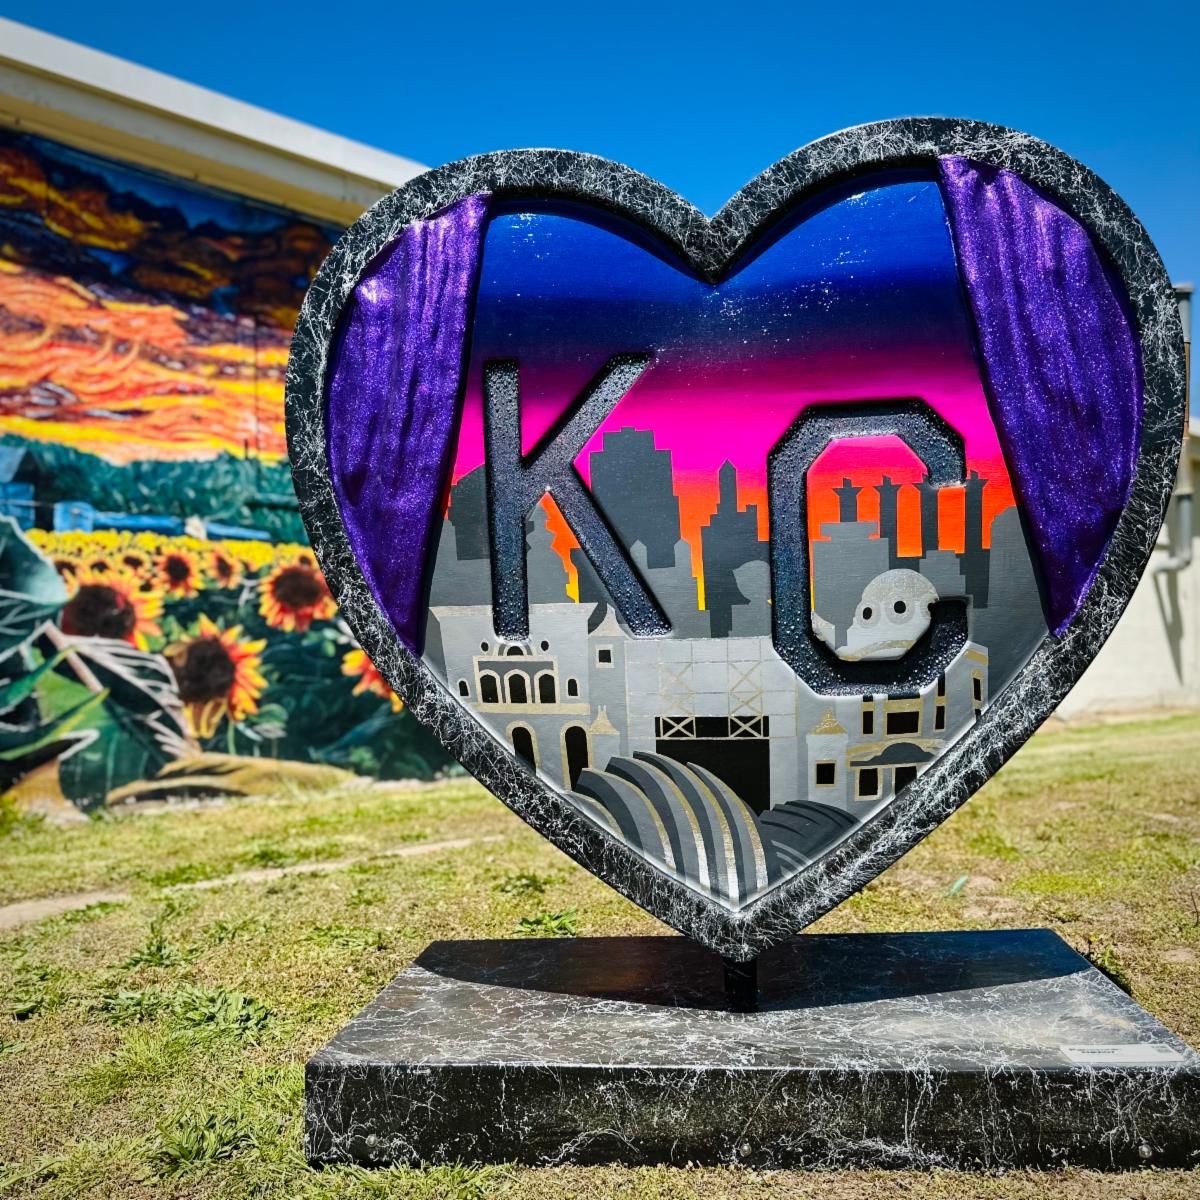 I loved having the heart displayed in De Soto for the @ParadeofH! It brightened up downtown & served as a great selfie/photo spot. Such a highlight in front of our sunflower mural!
I ❤️De Soto. That's why I am eager to serve our growing community! #paradeofhearts #DeSotoKS